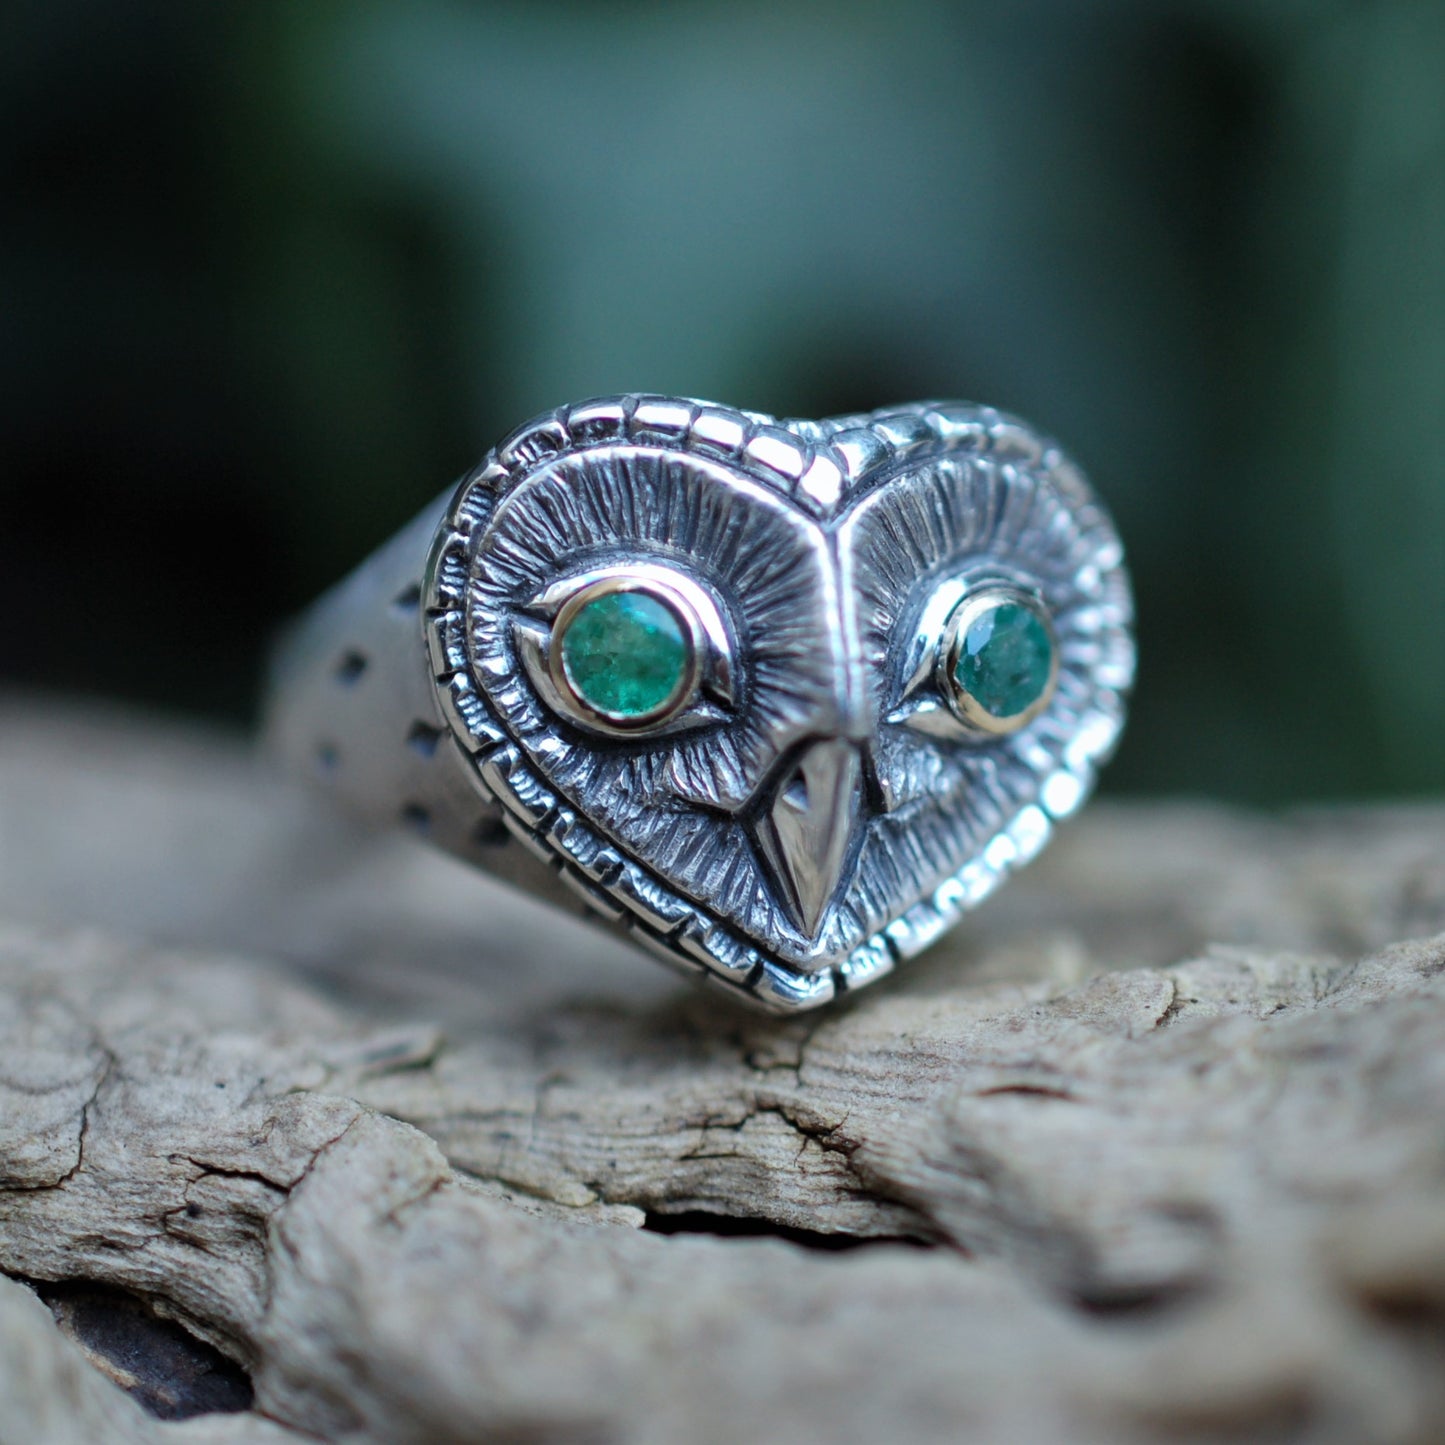 Owl ring, silver gold and emerald ring, sterling silver barn owl with gold and emerald eyes, antique finish. *This piece is ready to be shipped*